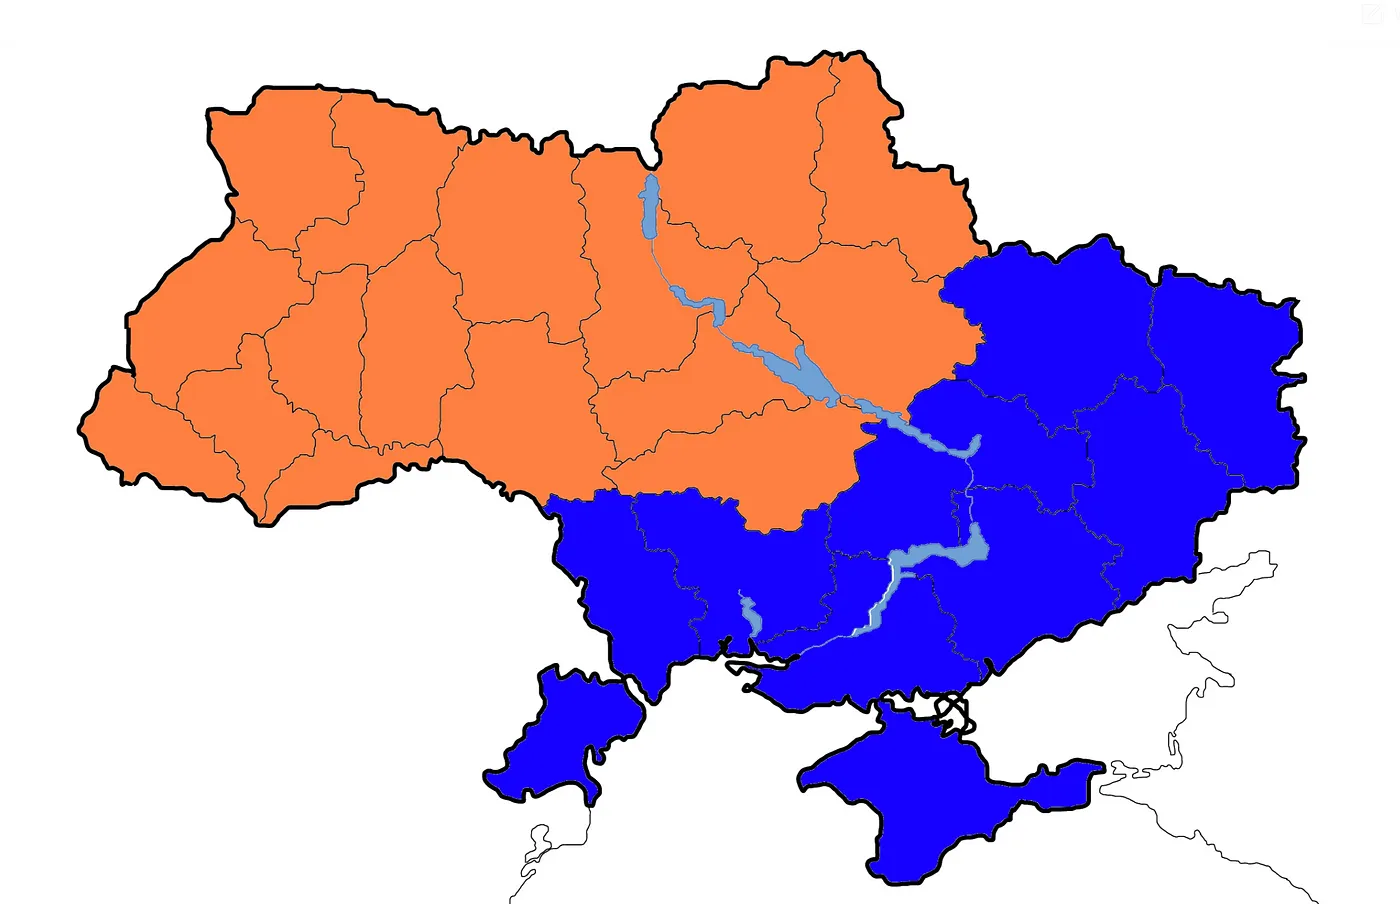 Picture of Ukraine with Crimea and ten Easterns and Southern regions coloured blue, other coloured orange